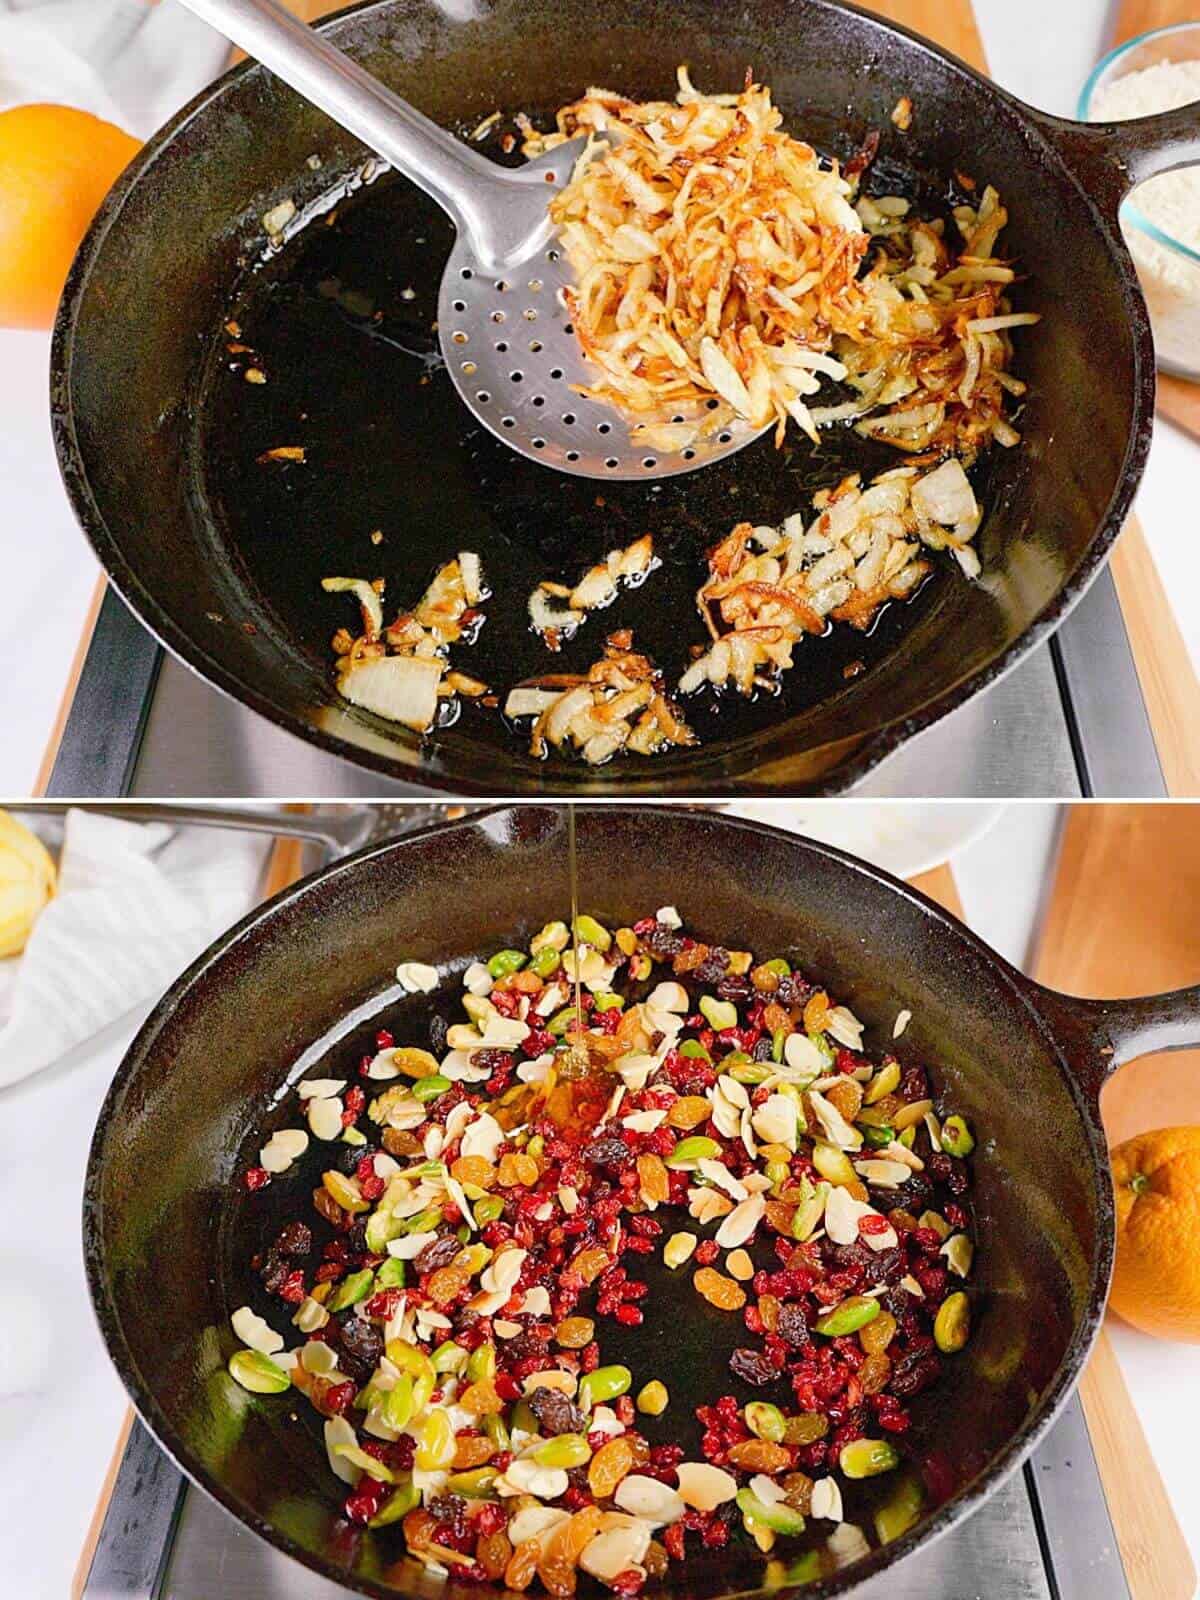 Frying onions and dried fruit-nut mixture.